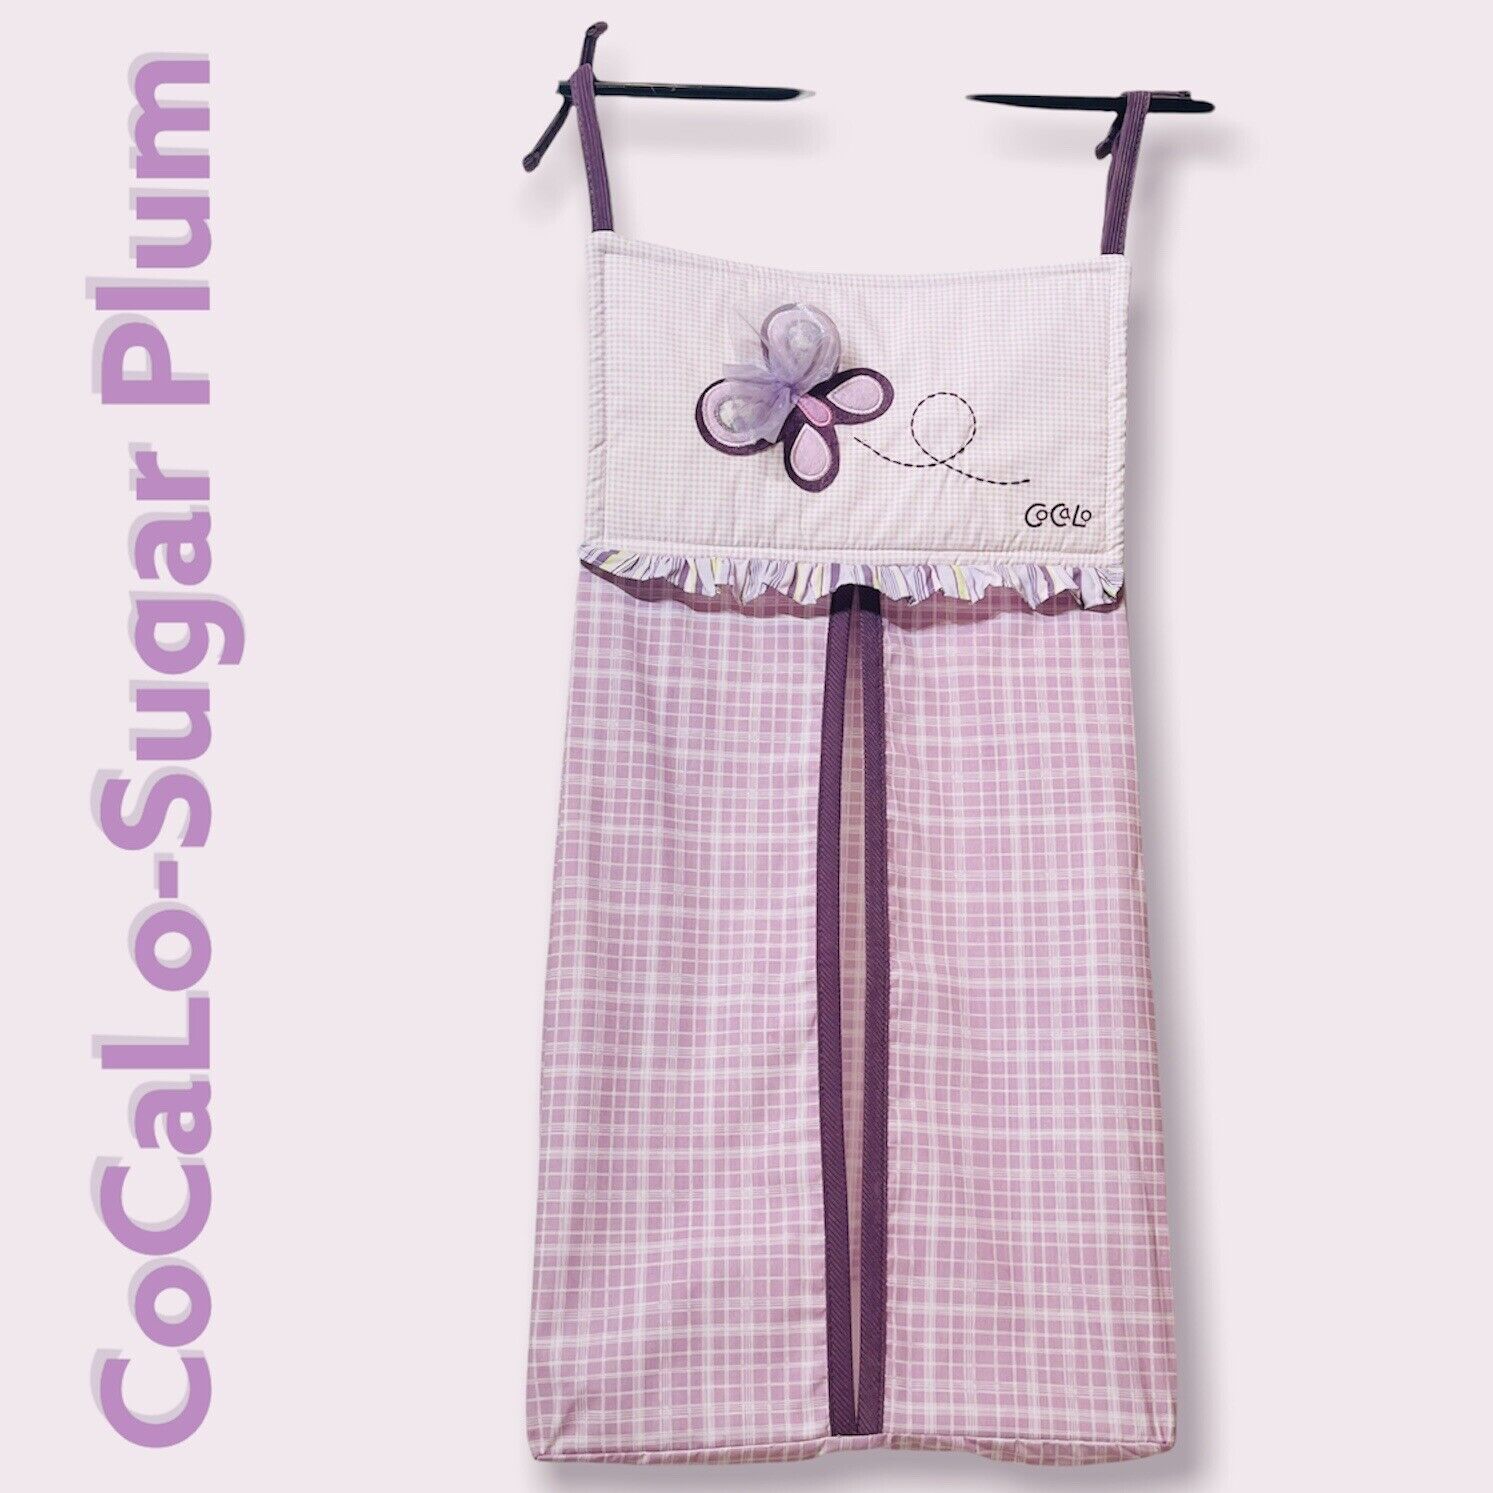 Cocalo Baby Diaper Holder Stacker Purple Butterfly Plaid Checkered Sugar Plum